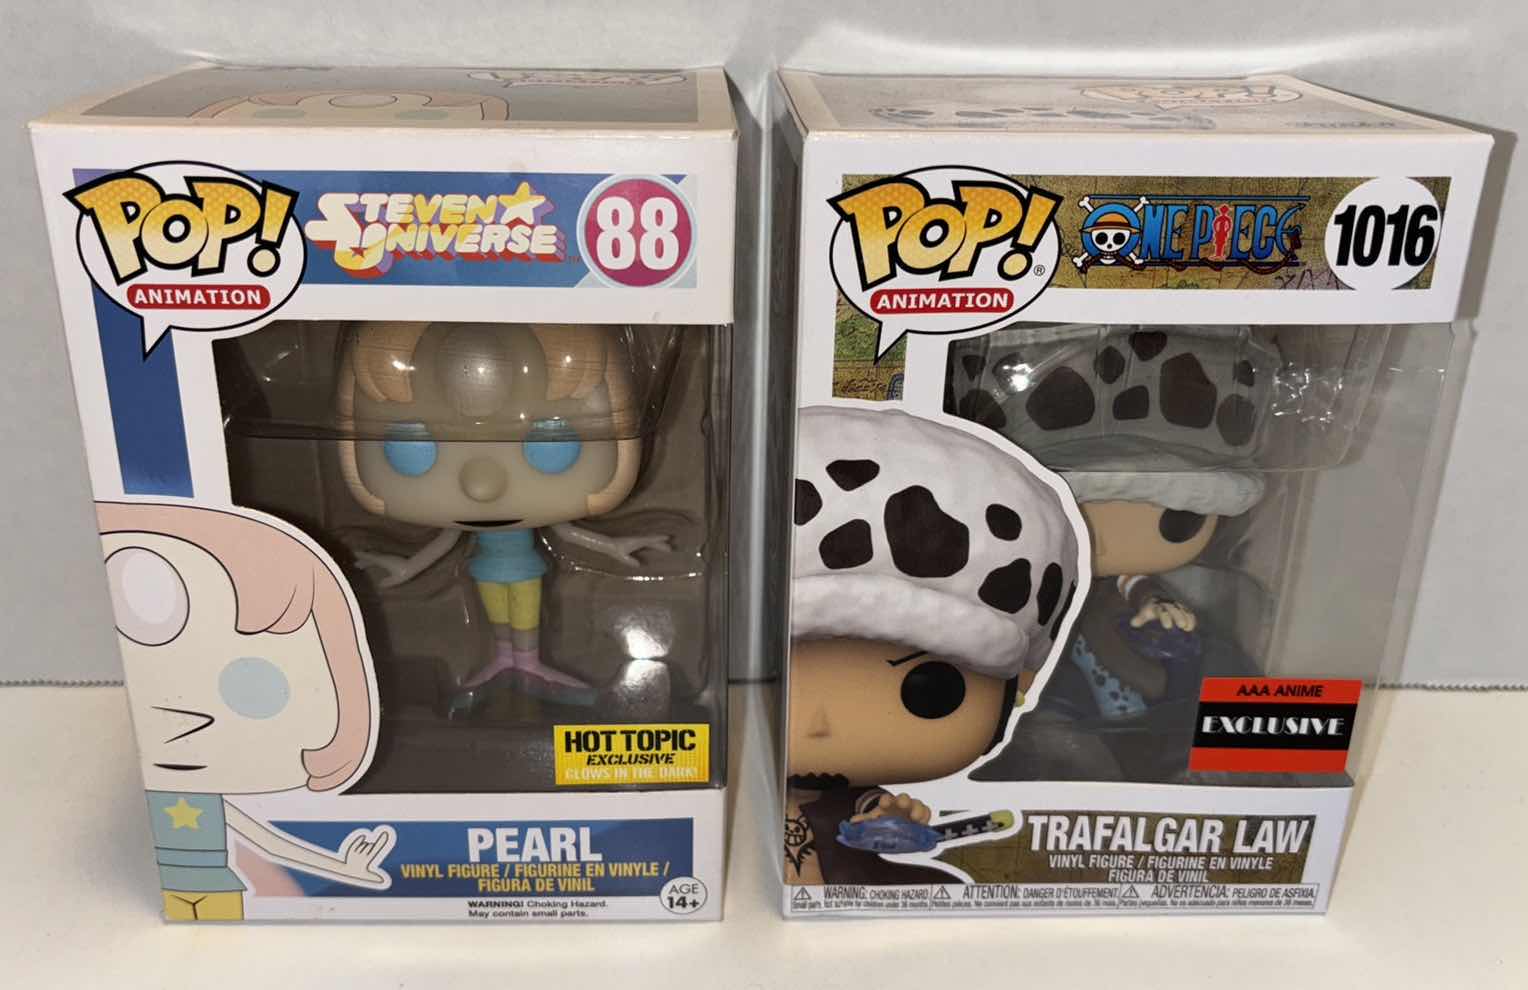 Photo 4 of NEW FUNKO POP! ANIMATION VINYL FIGURE 2-PACK, HOT TOPIC EXCLUSIVE STEVEN UNIVERSE #88 PEARL & AAA ANIME EXCLUSIVE ONE PIECE #1016 TRAFALGAR LAW